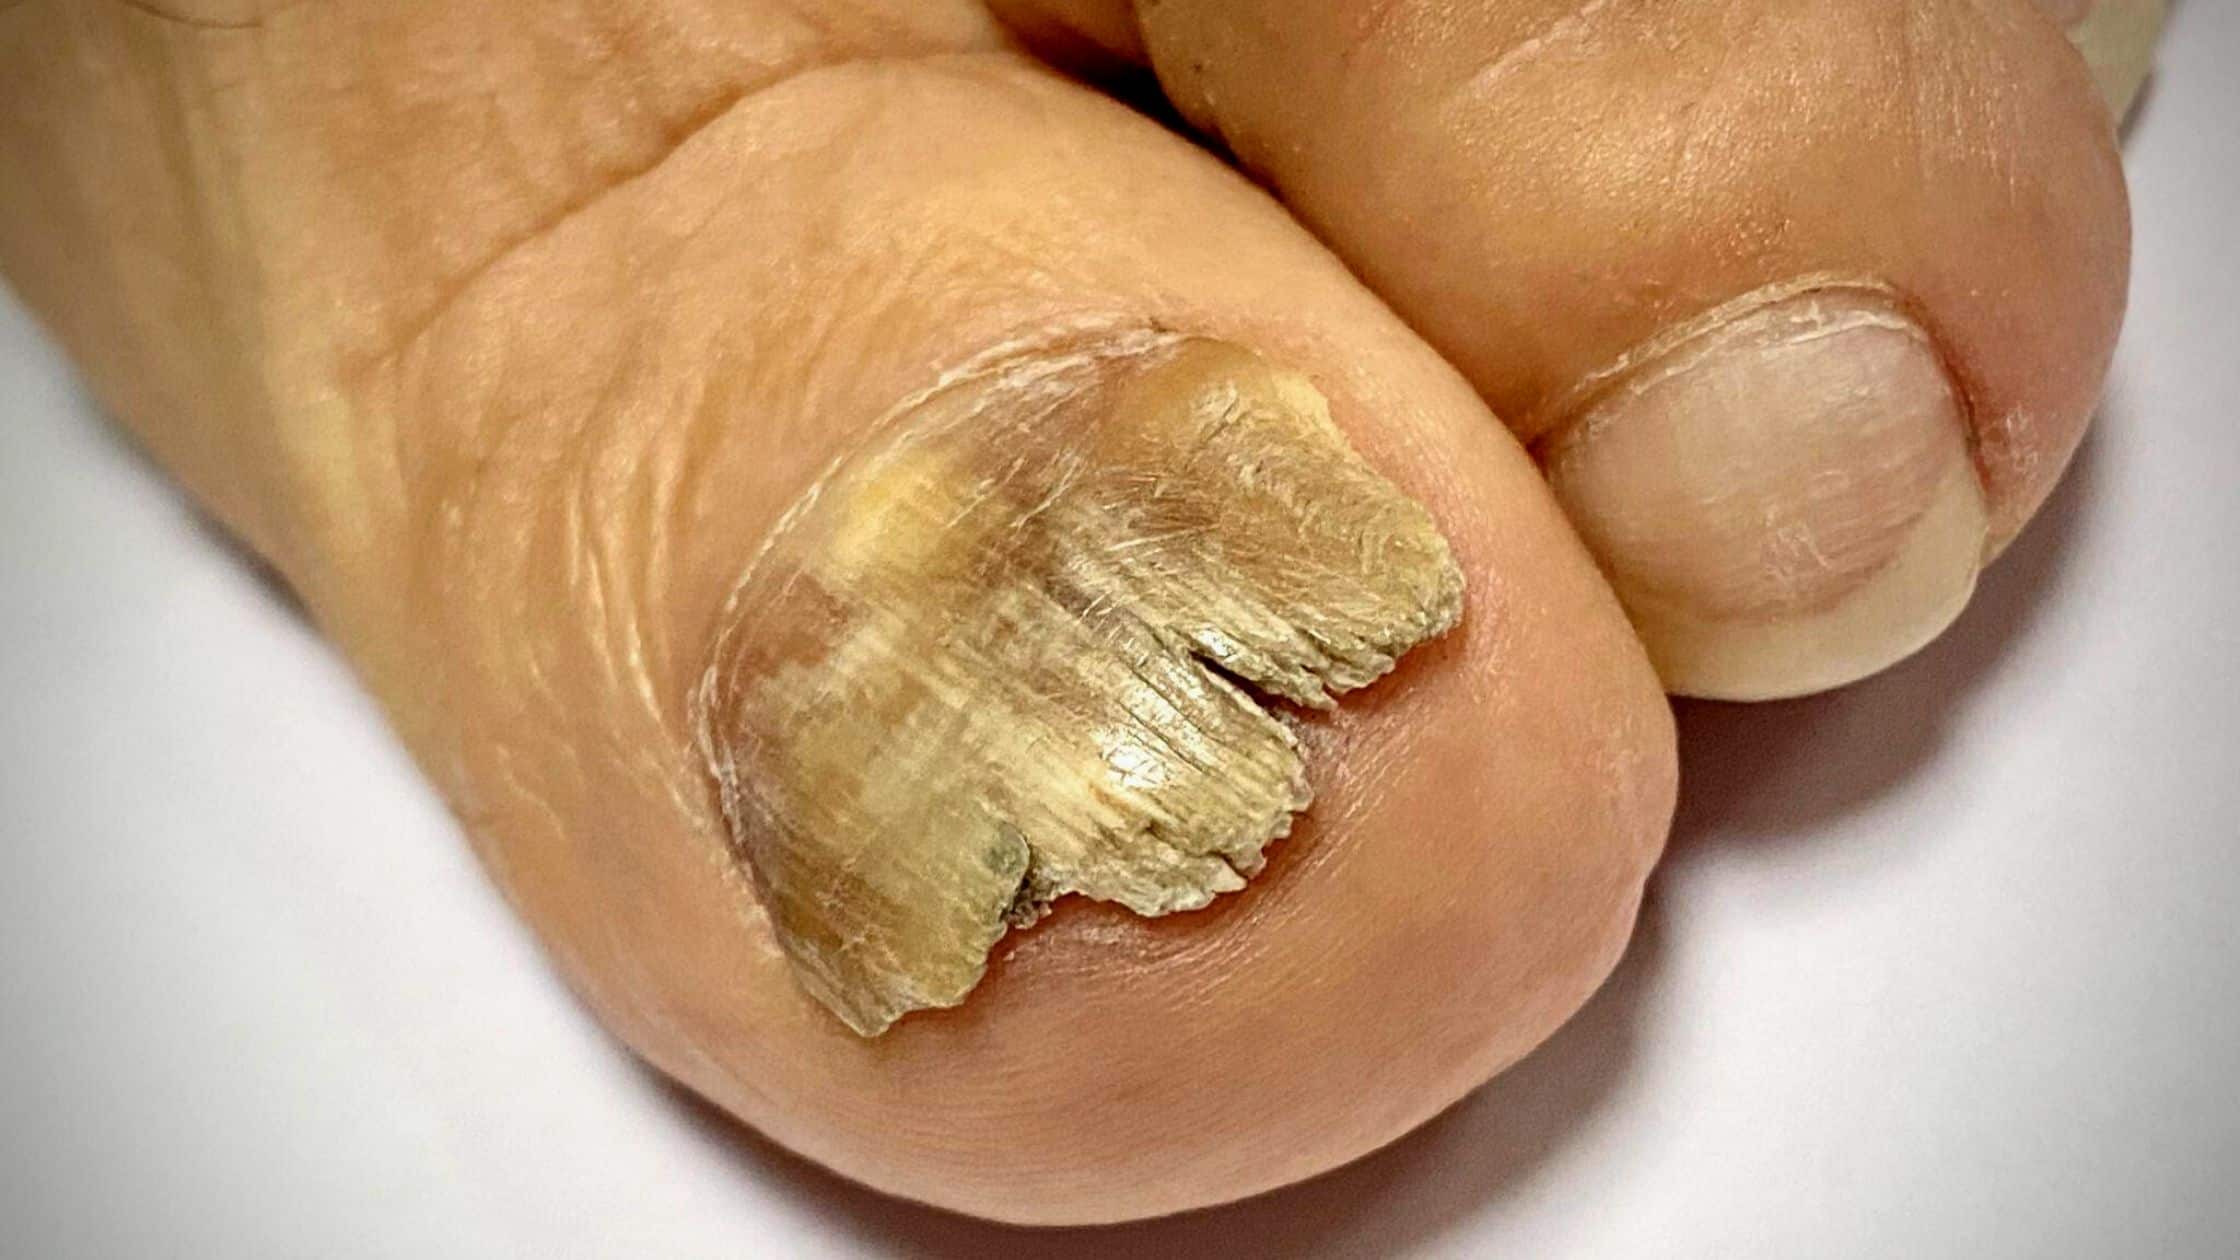 Treatments For Nail Fungal Infection - Various Types Of Treatments